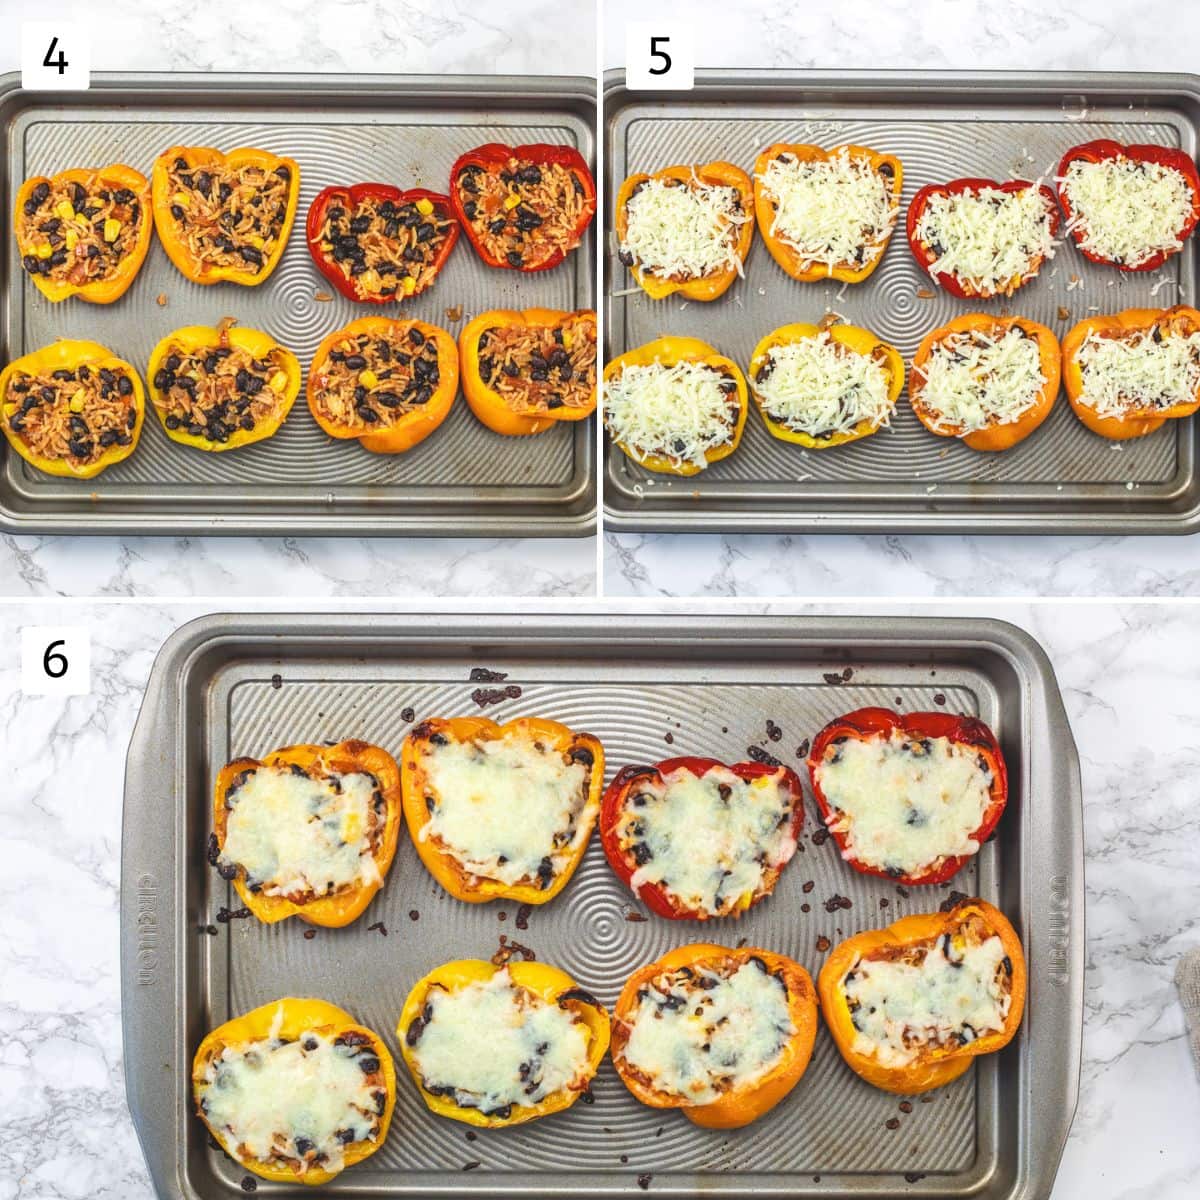 Collage of 3 images showing stuffing cooked peppers with stuffing, sprinkling cheese and baked.